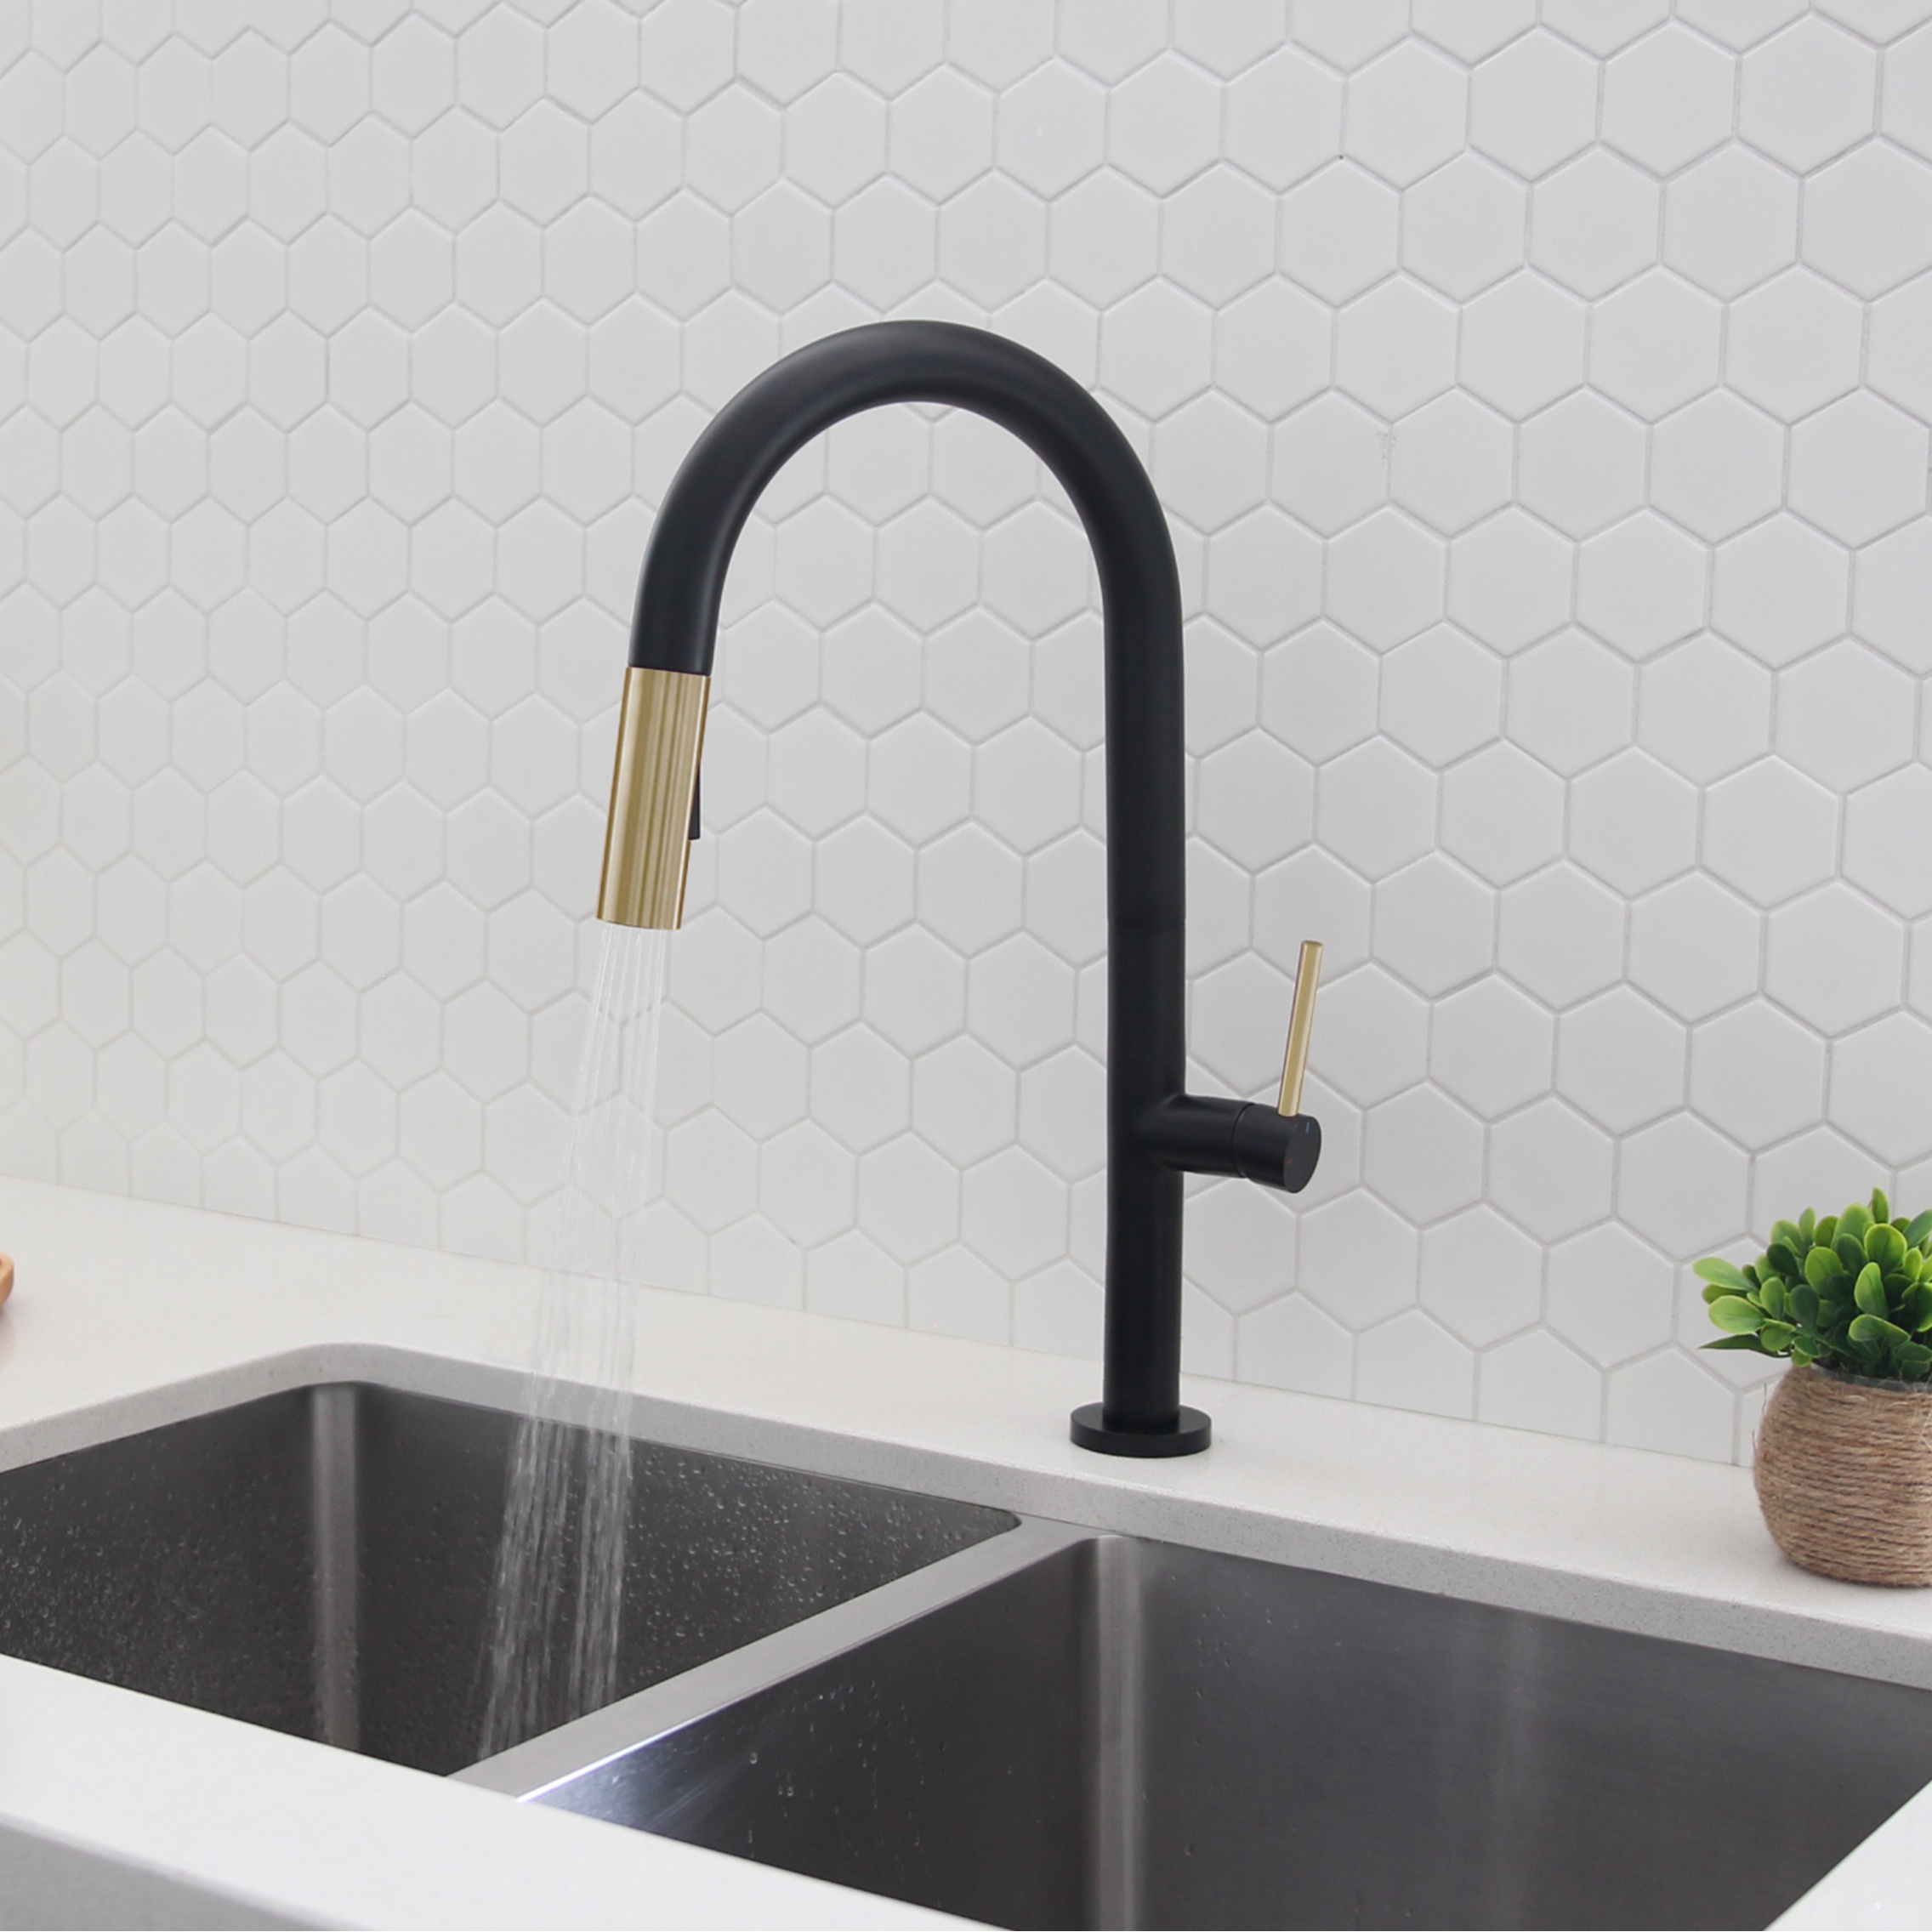 STYLISH Kitchen Sink Faucet  Lead Free Matte Black with Rose Gold Head and Handle Finish